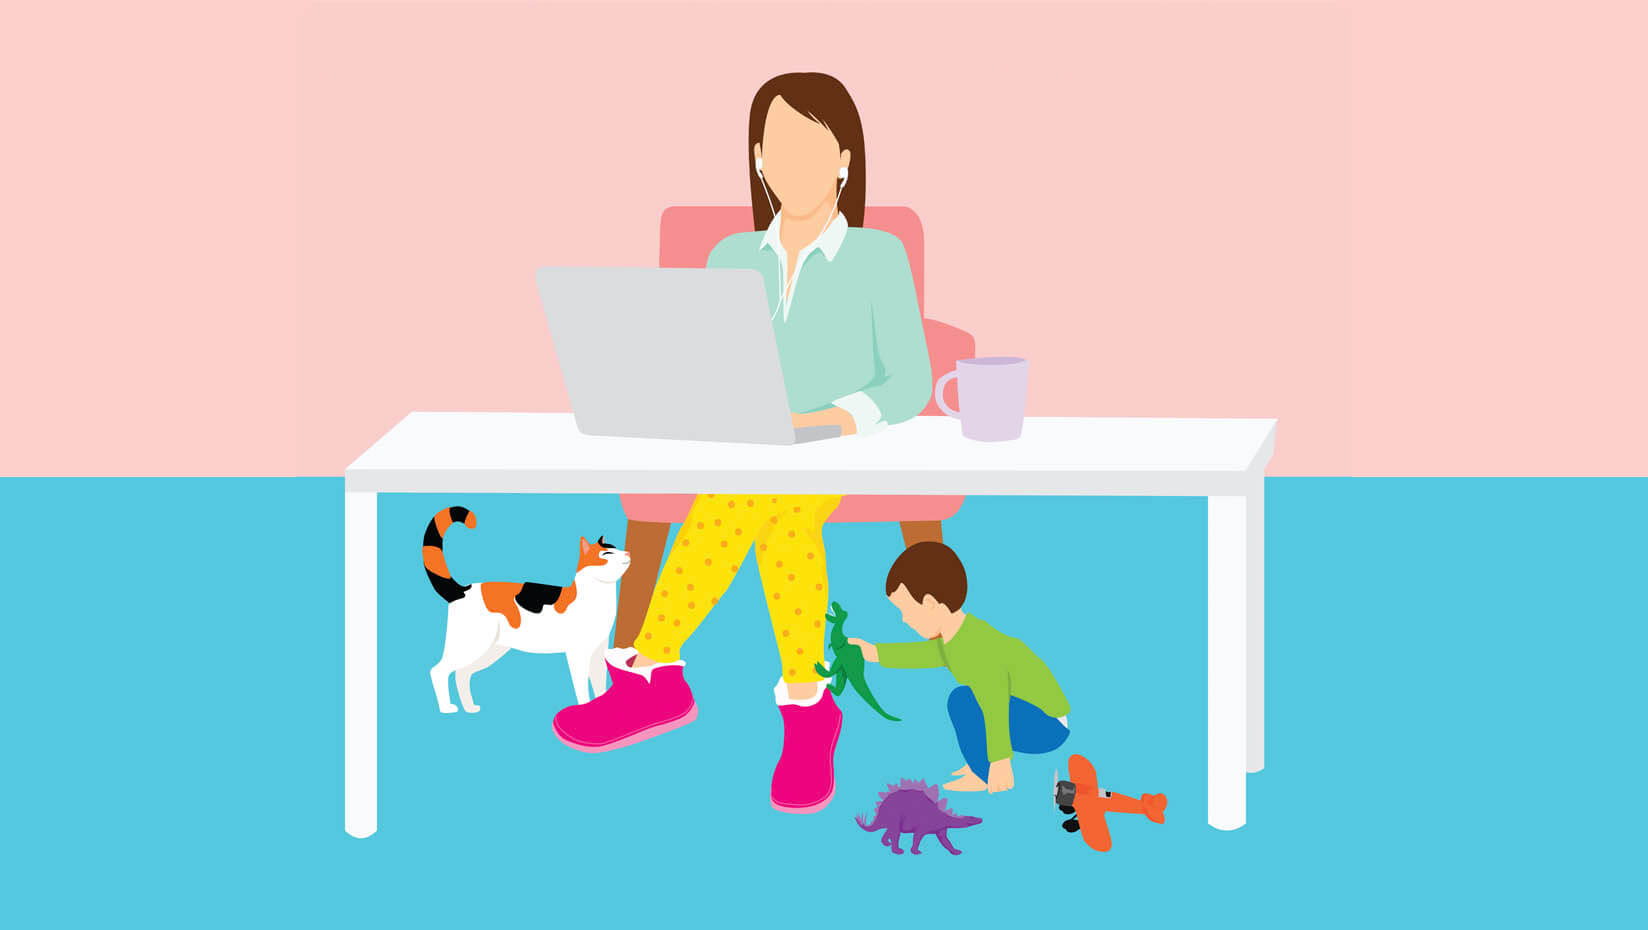 An illustration of a woman working from home while taking care of a child